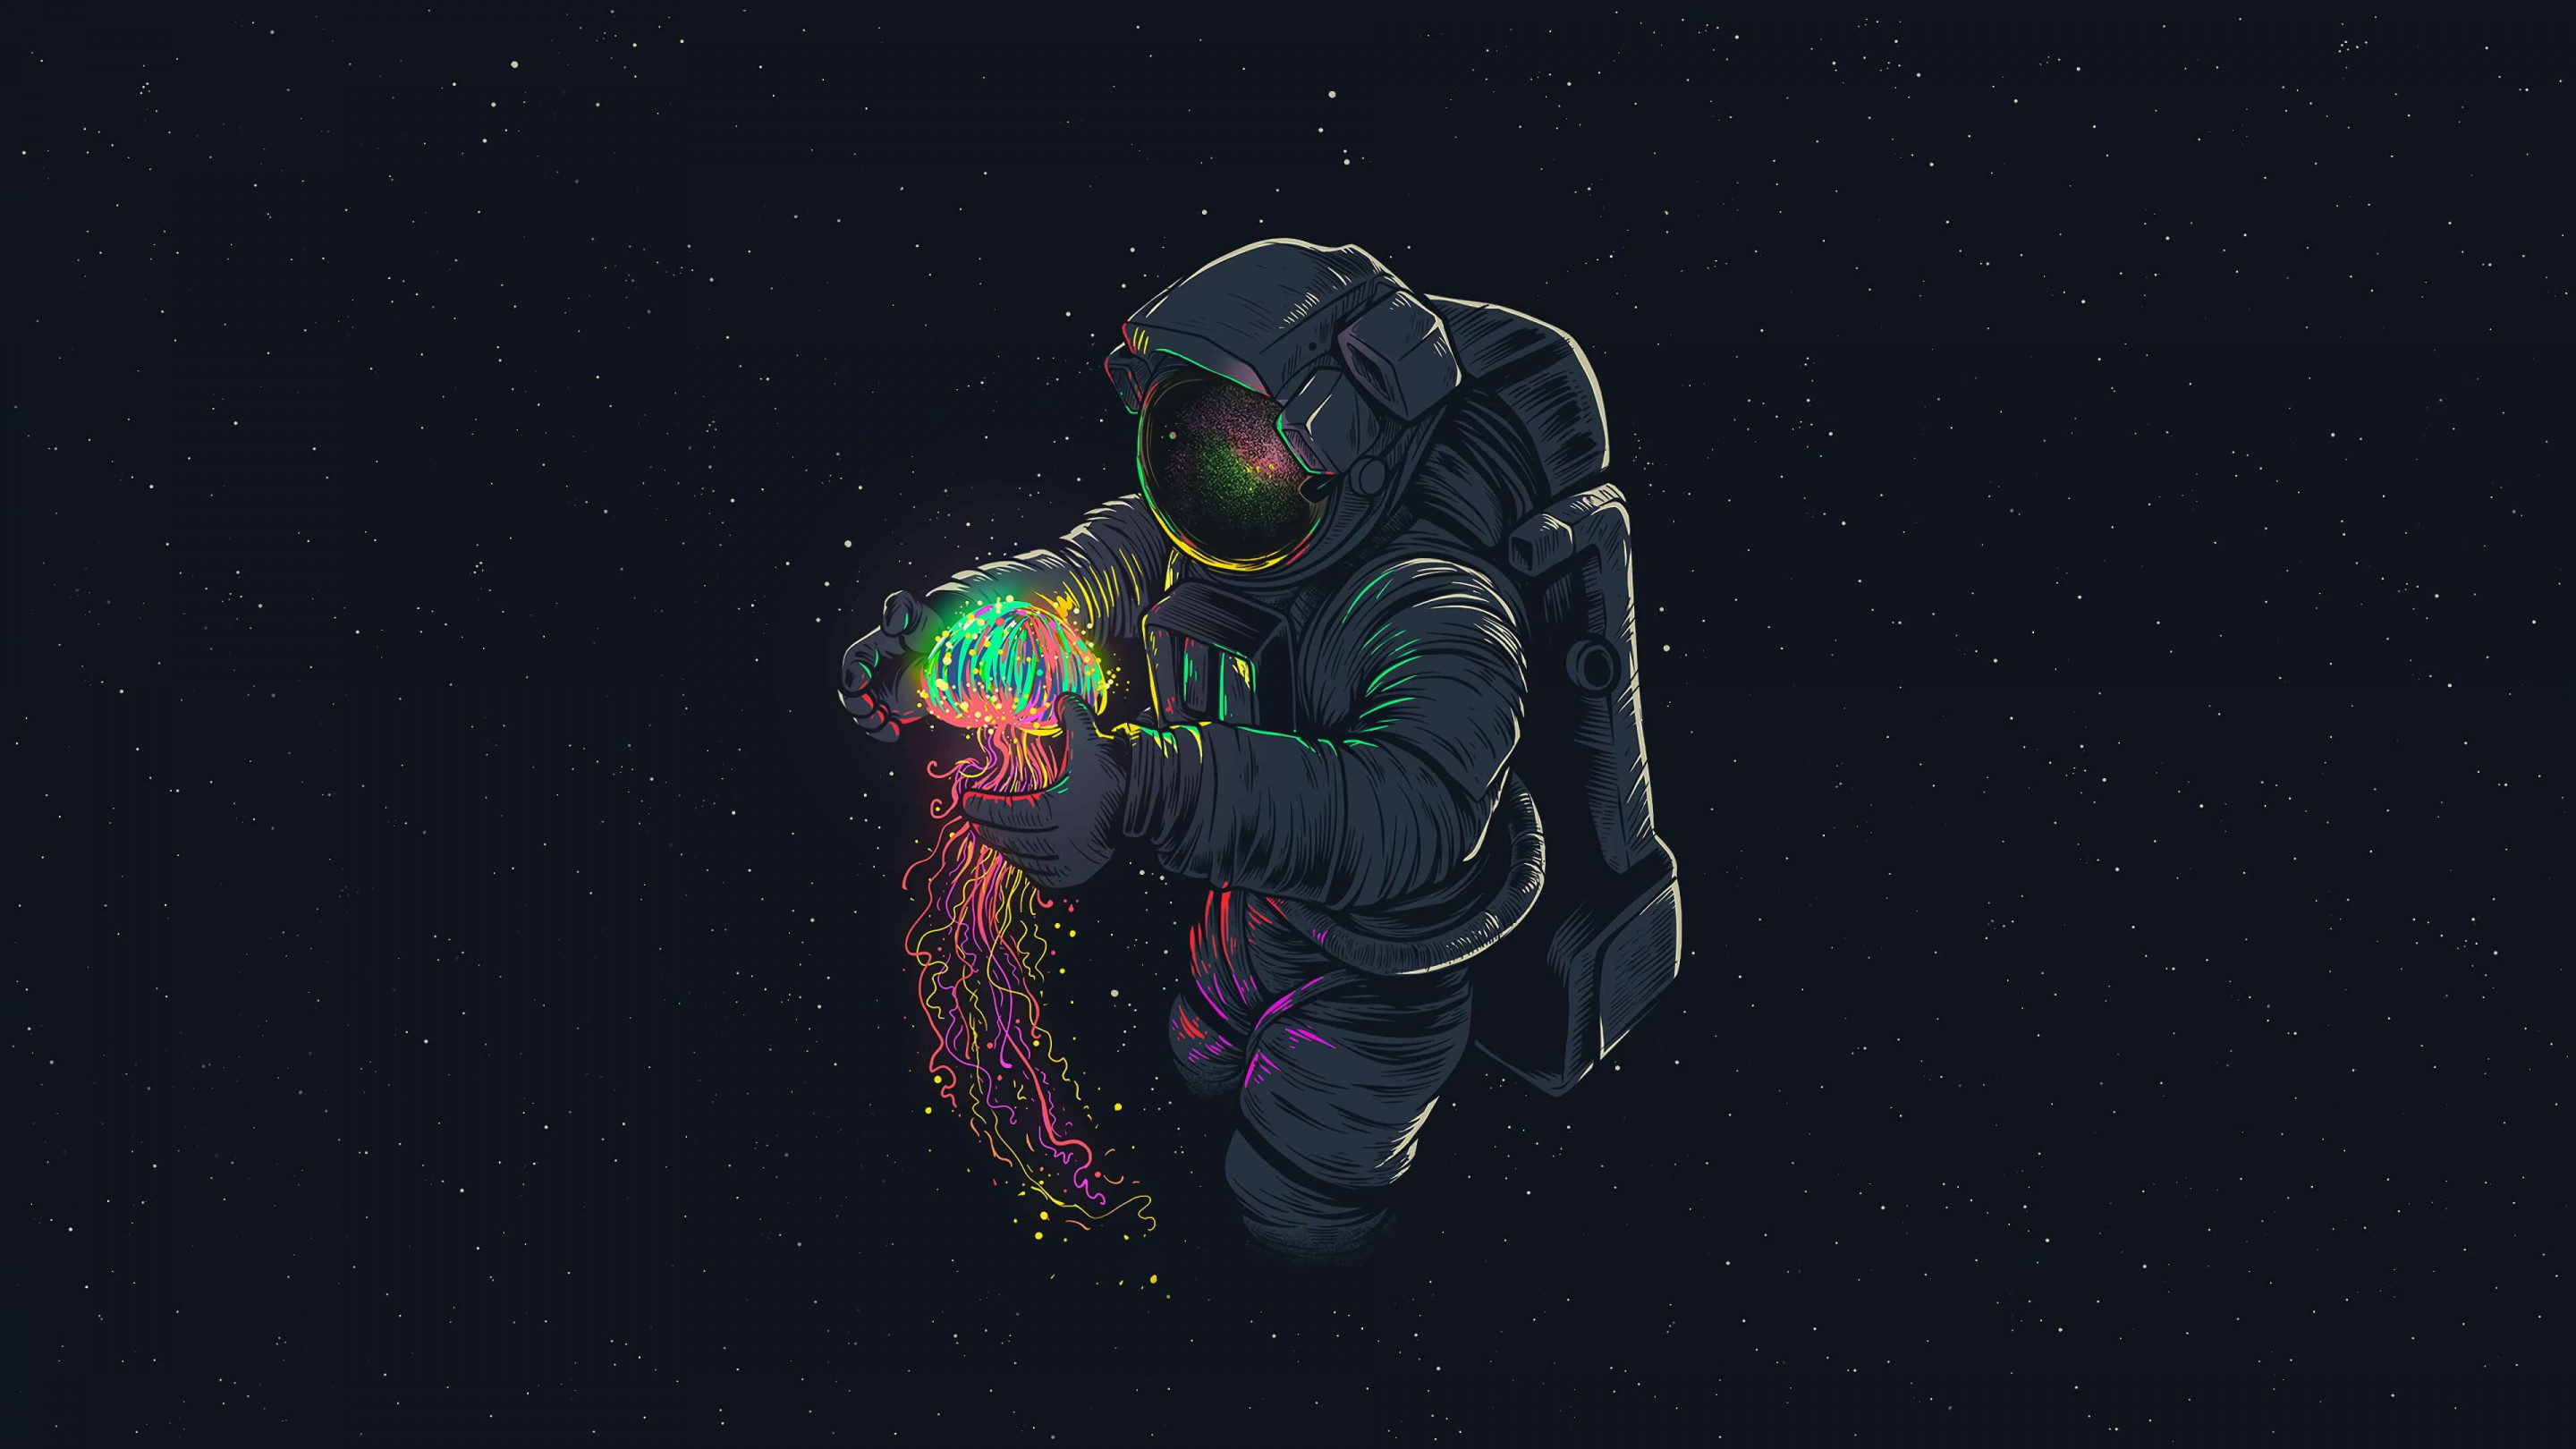 Astronaut with Jellyfish wallpaper 2880x1620